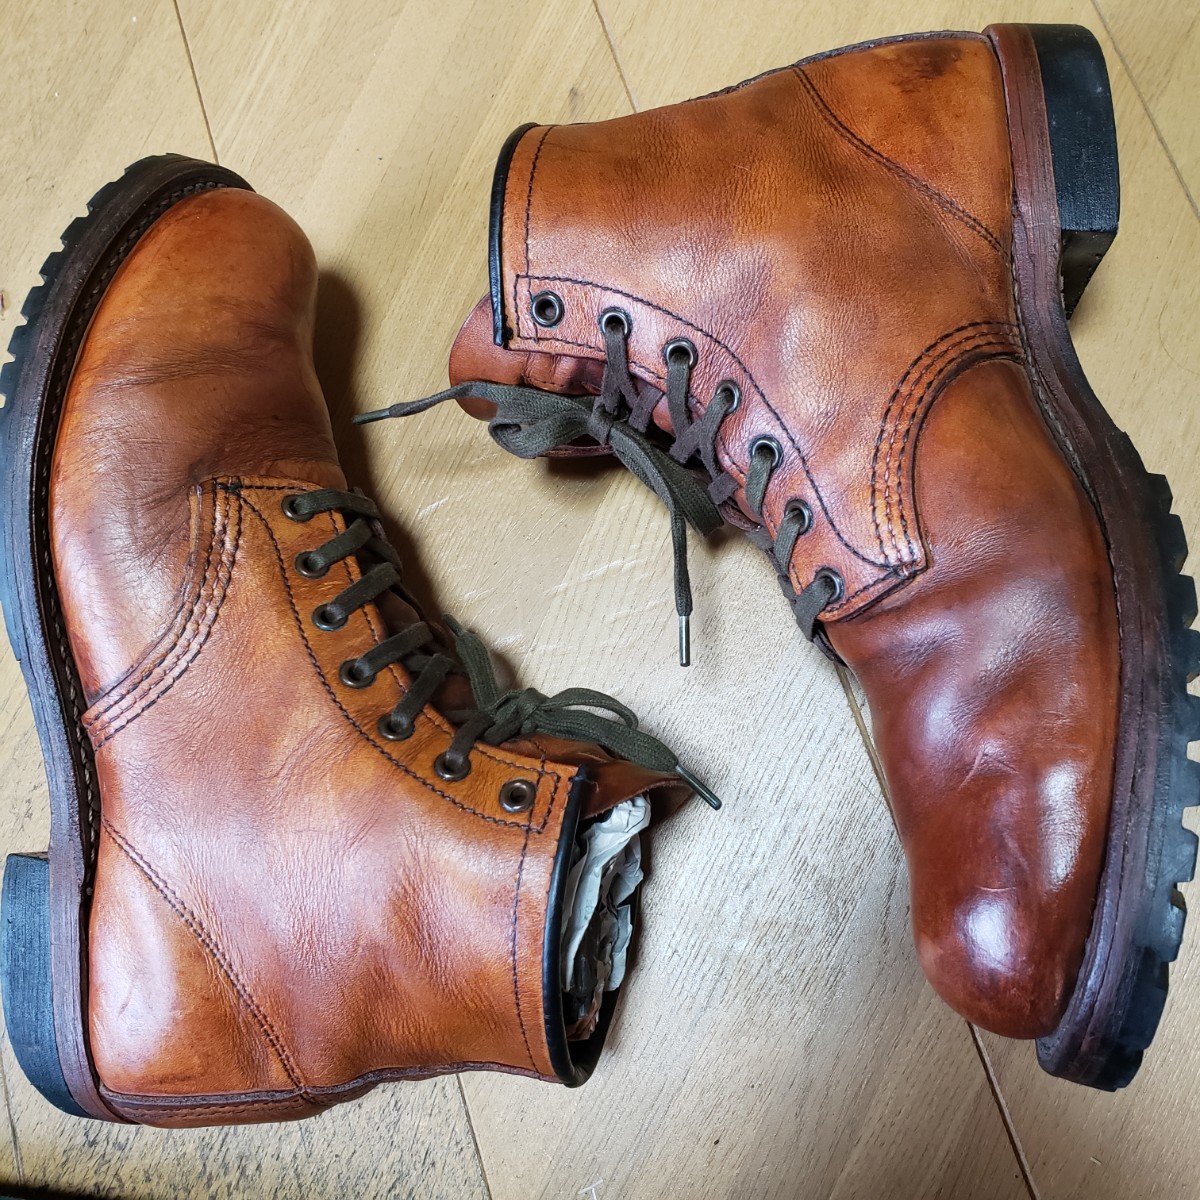 REDWING レッドウィング 9013 ベックマン BECKMAN 皮革 leather レザー boots ブーツ 米国製 made in USA シューズ shoes チェスナット 7.5_画像5